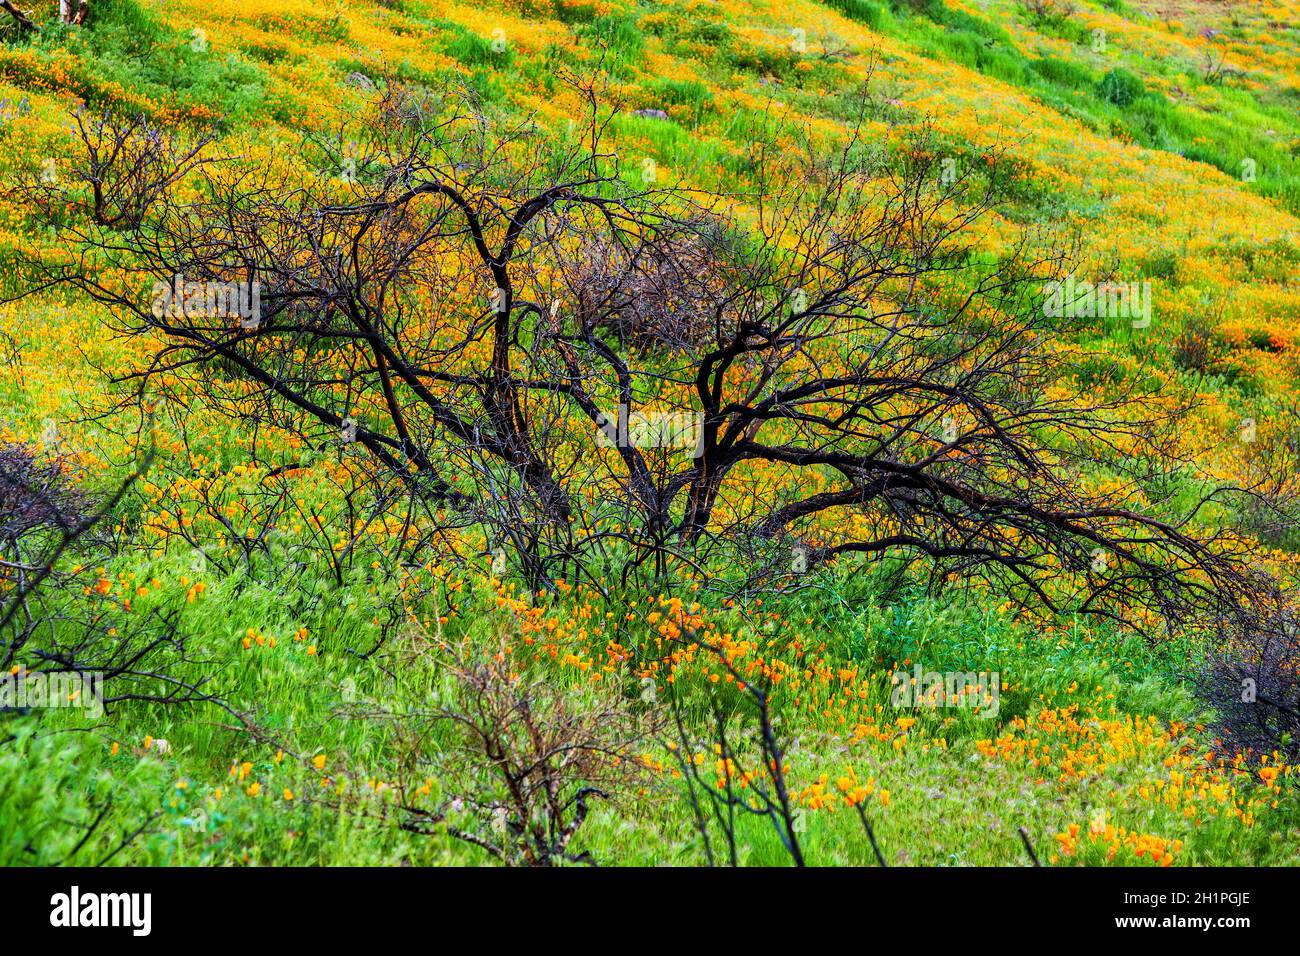 Burned Tree Surrounded by California Poppies. Wildflowers After a Wildfire. Orange California poppy flowers in bloom surround a charred tree. Stock Photo